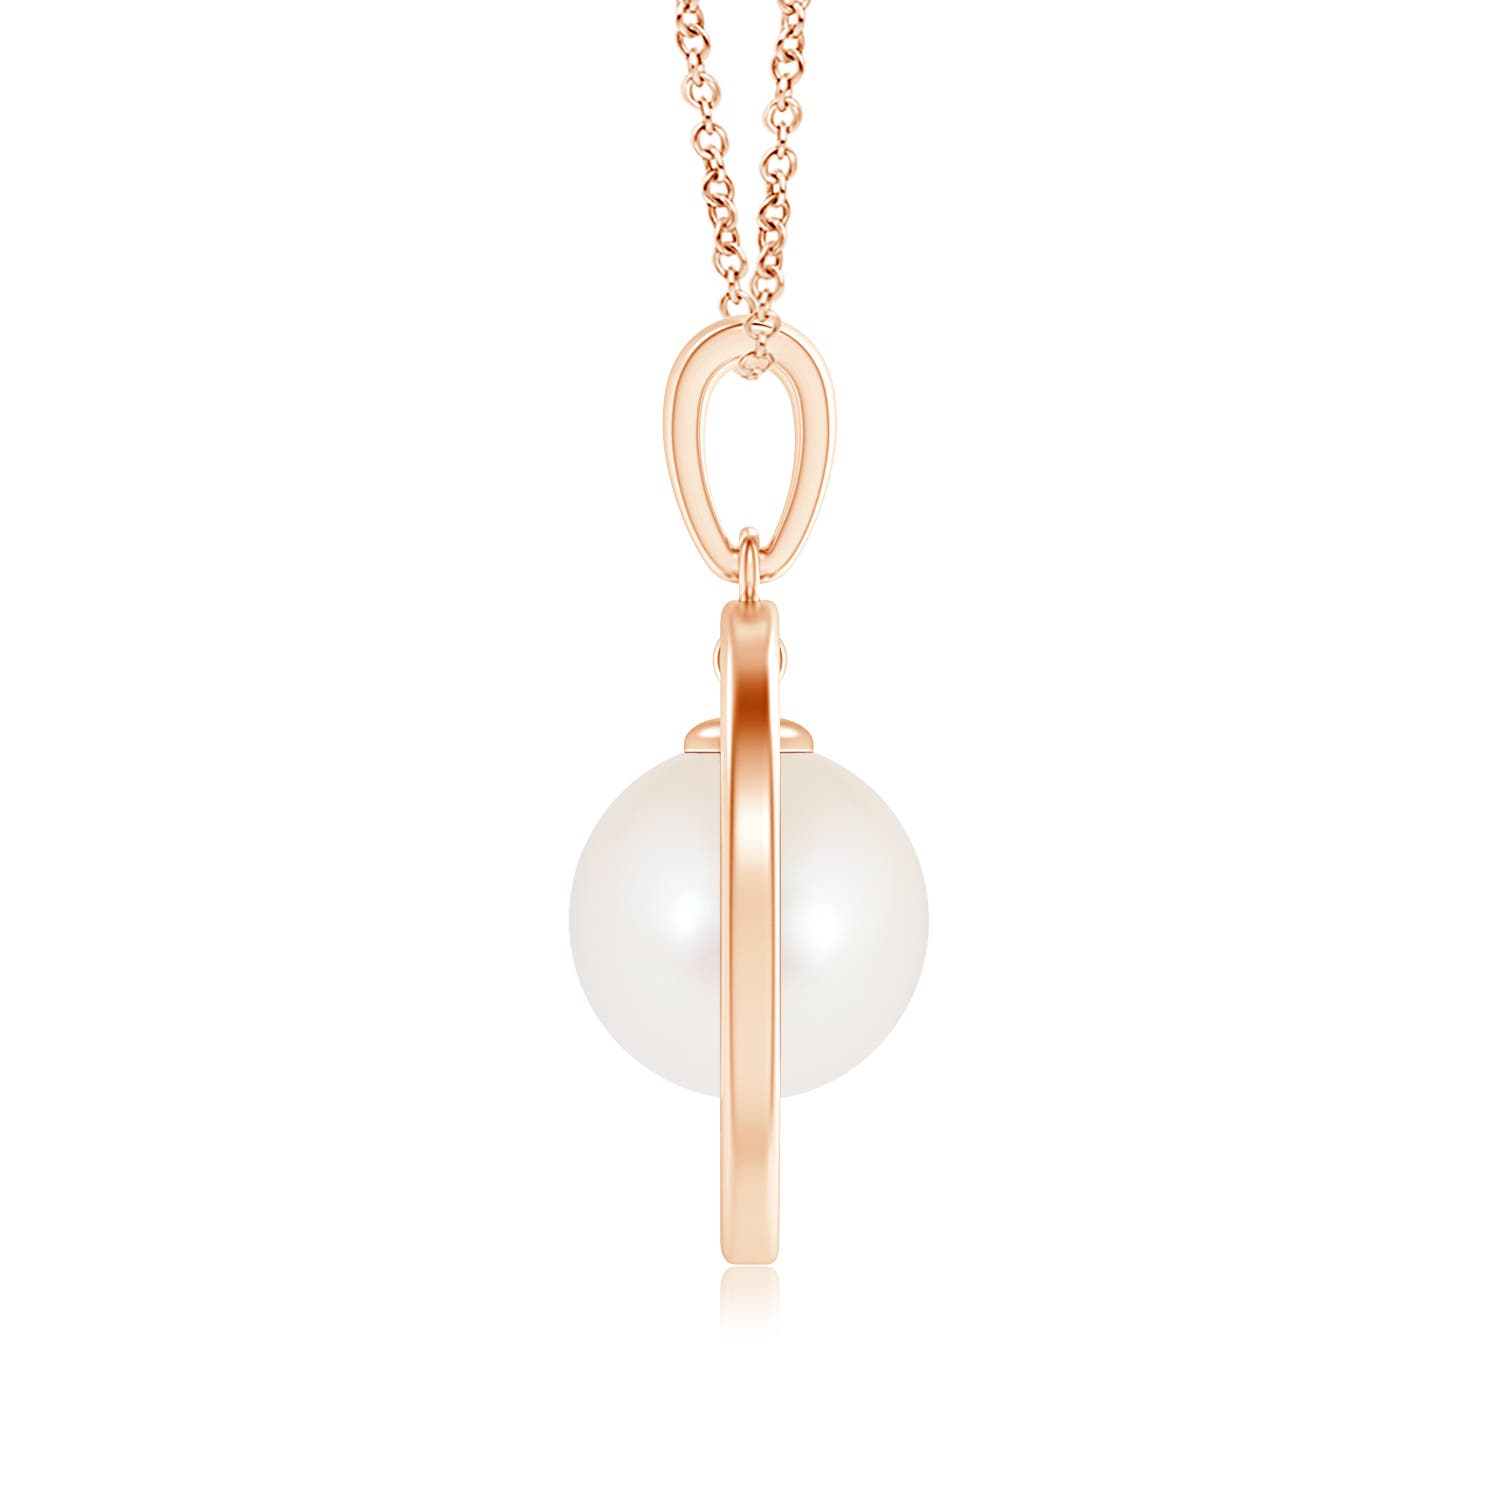 AAA - Freshwater Cultured Pearl / 5.25 CT / 14 KT Rose Gold